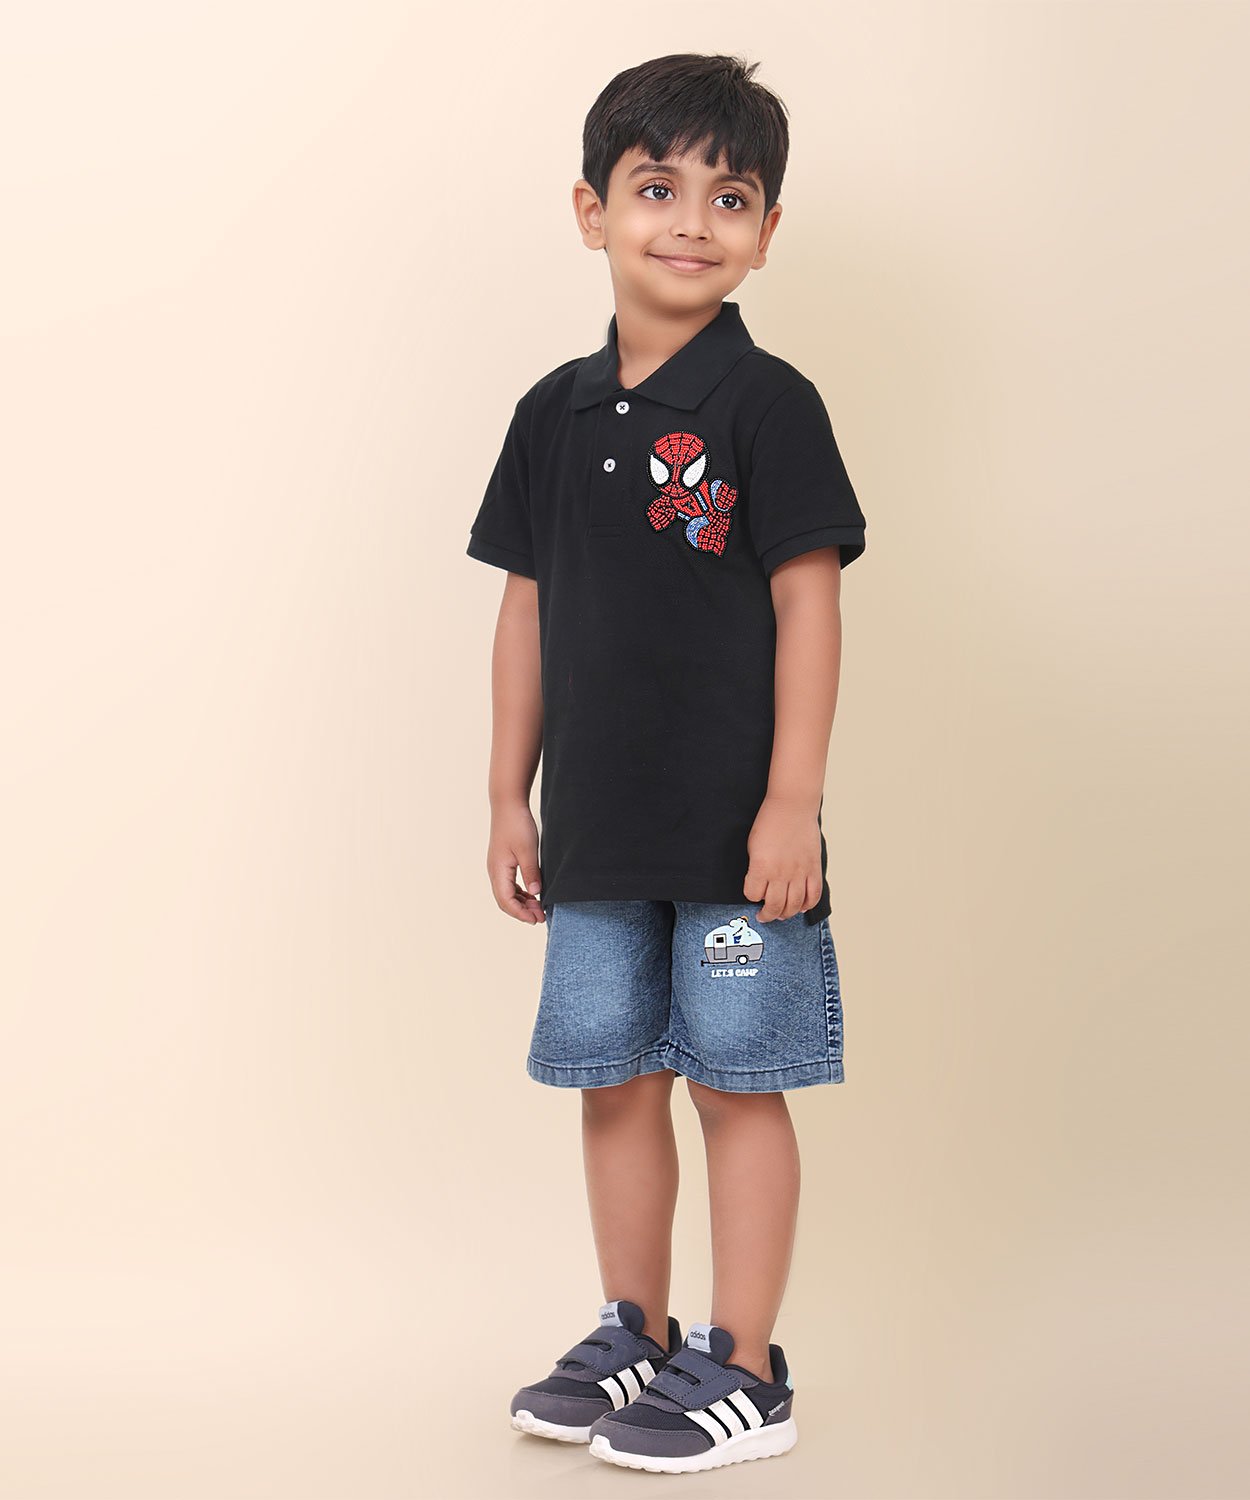 Black Polo T-Shirt With Hand Made Spiderman Embellishment